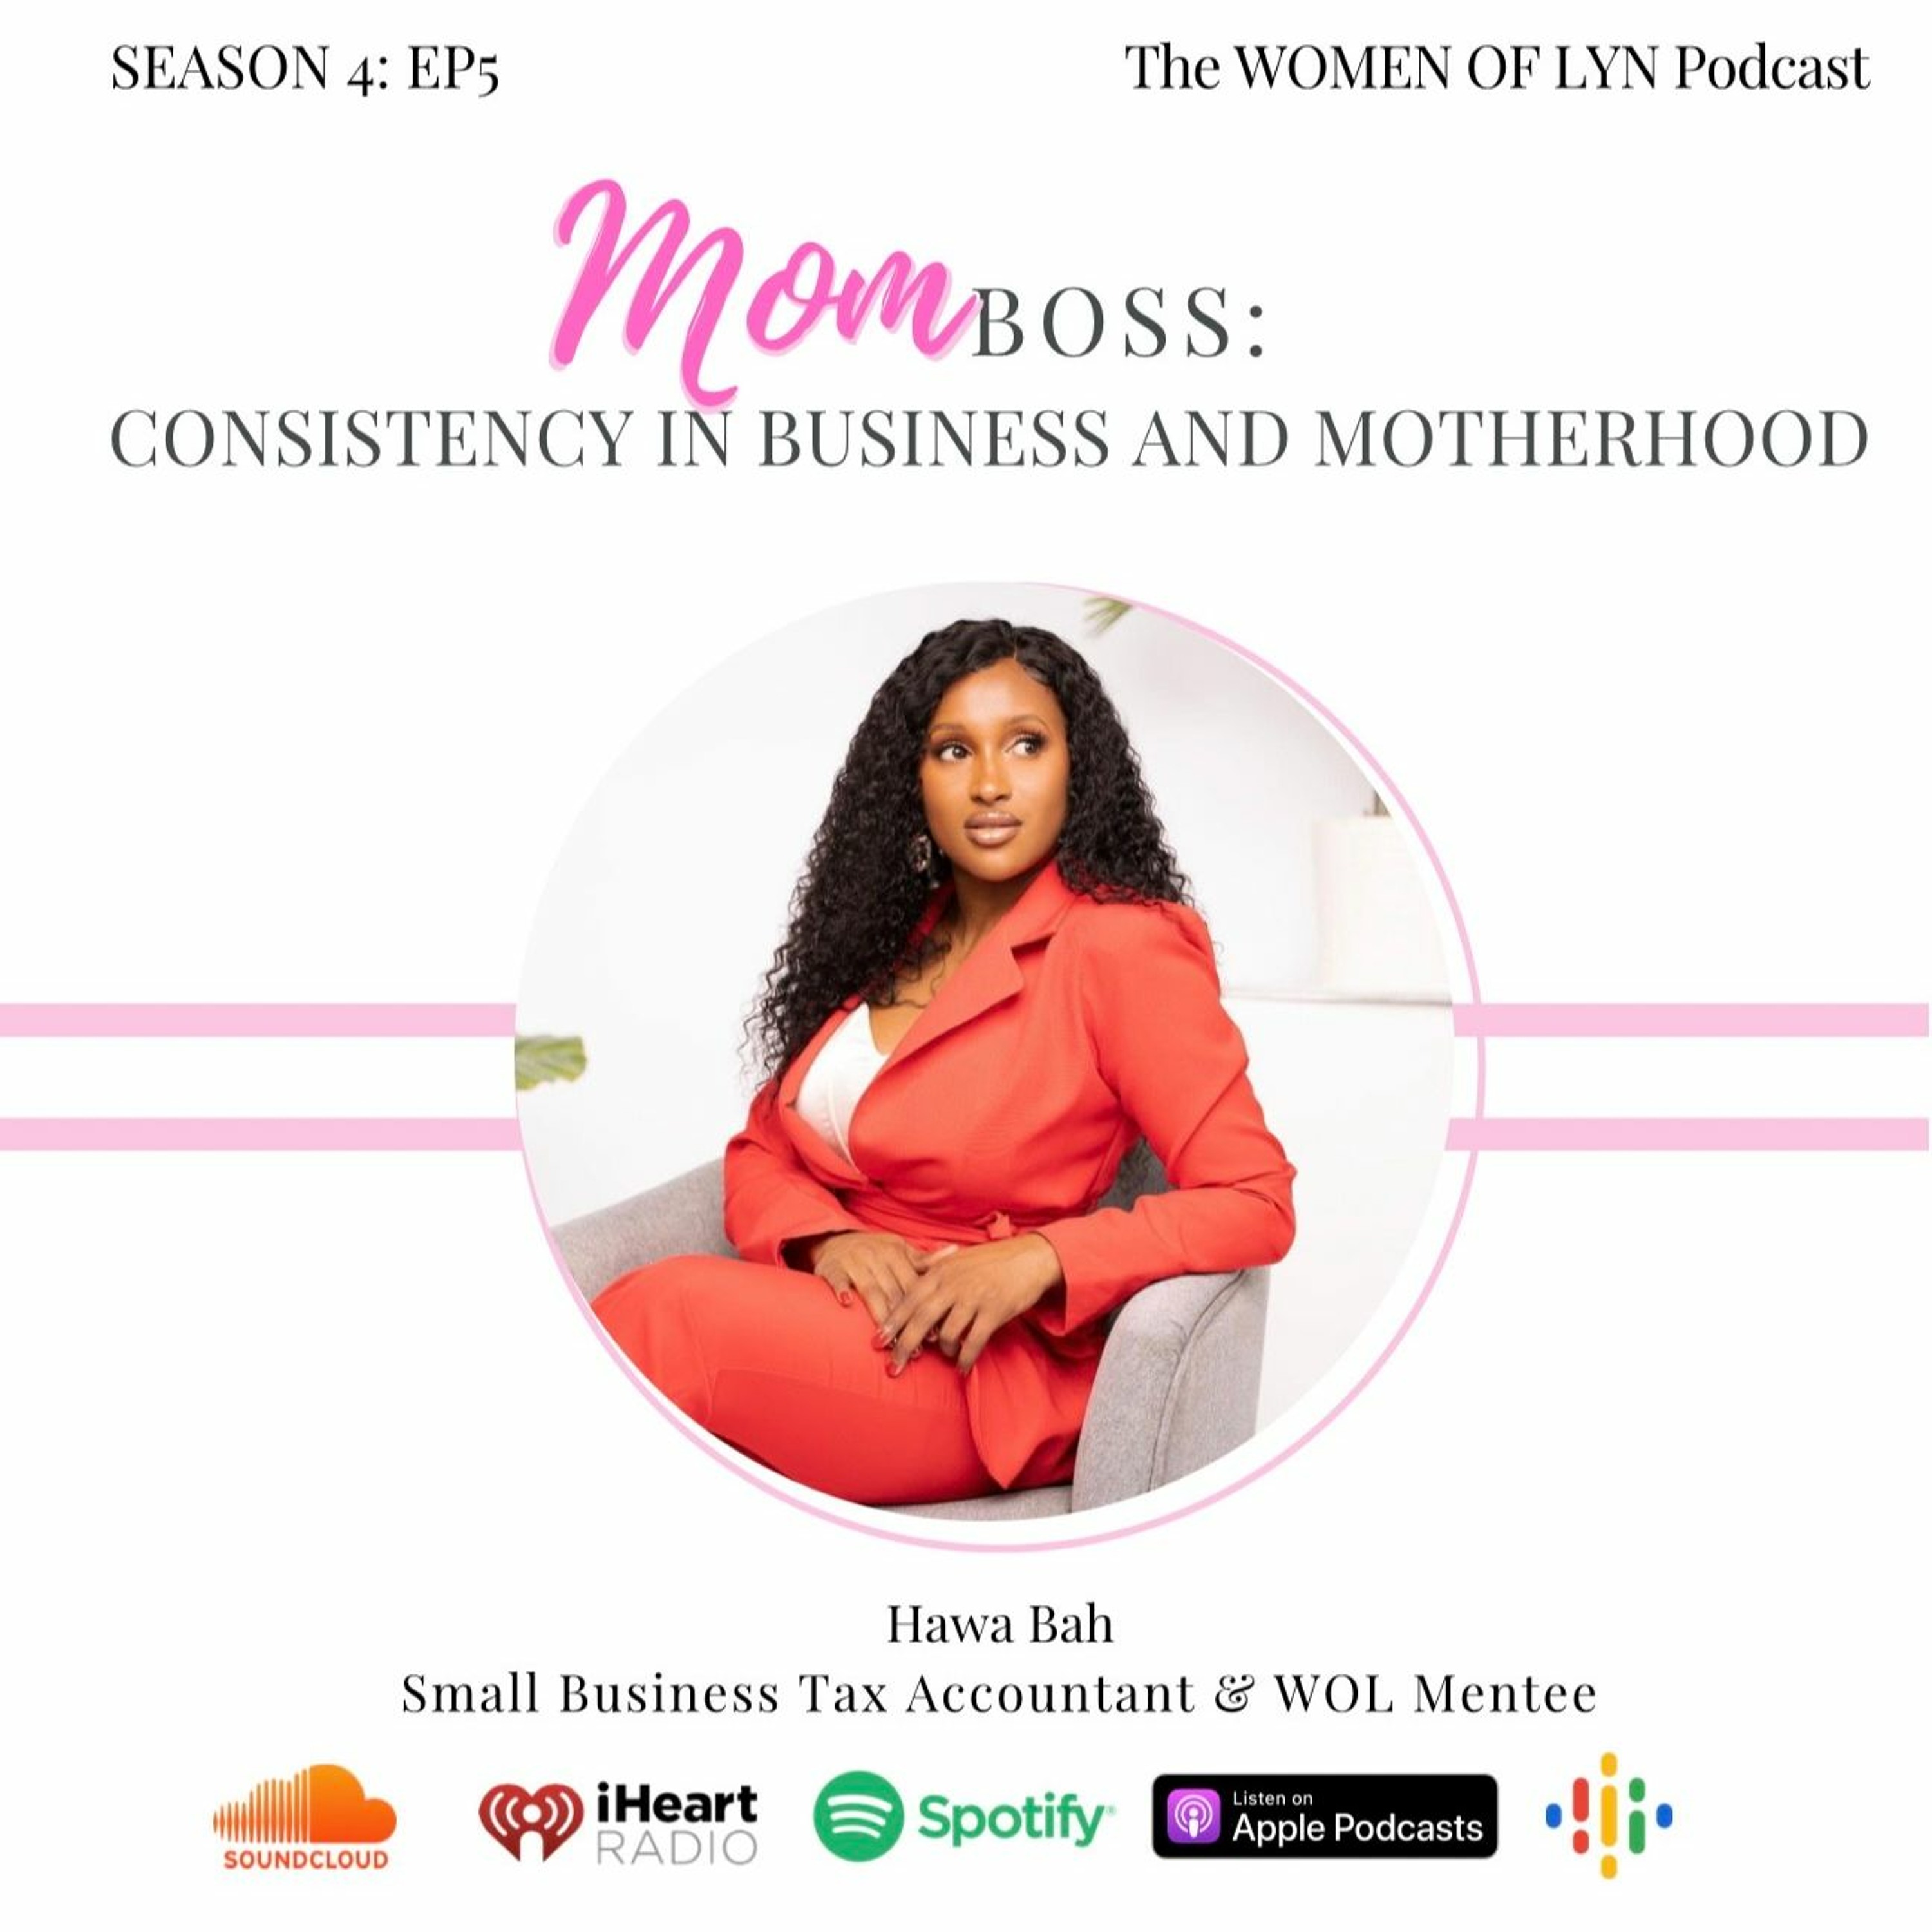 Episode 5: ”Mom Boss: Consistency in Business and Motherhood” Ft. Hawa Bah